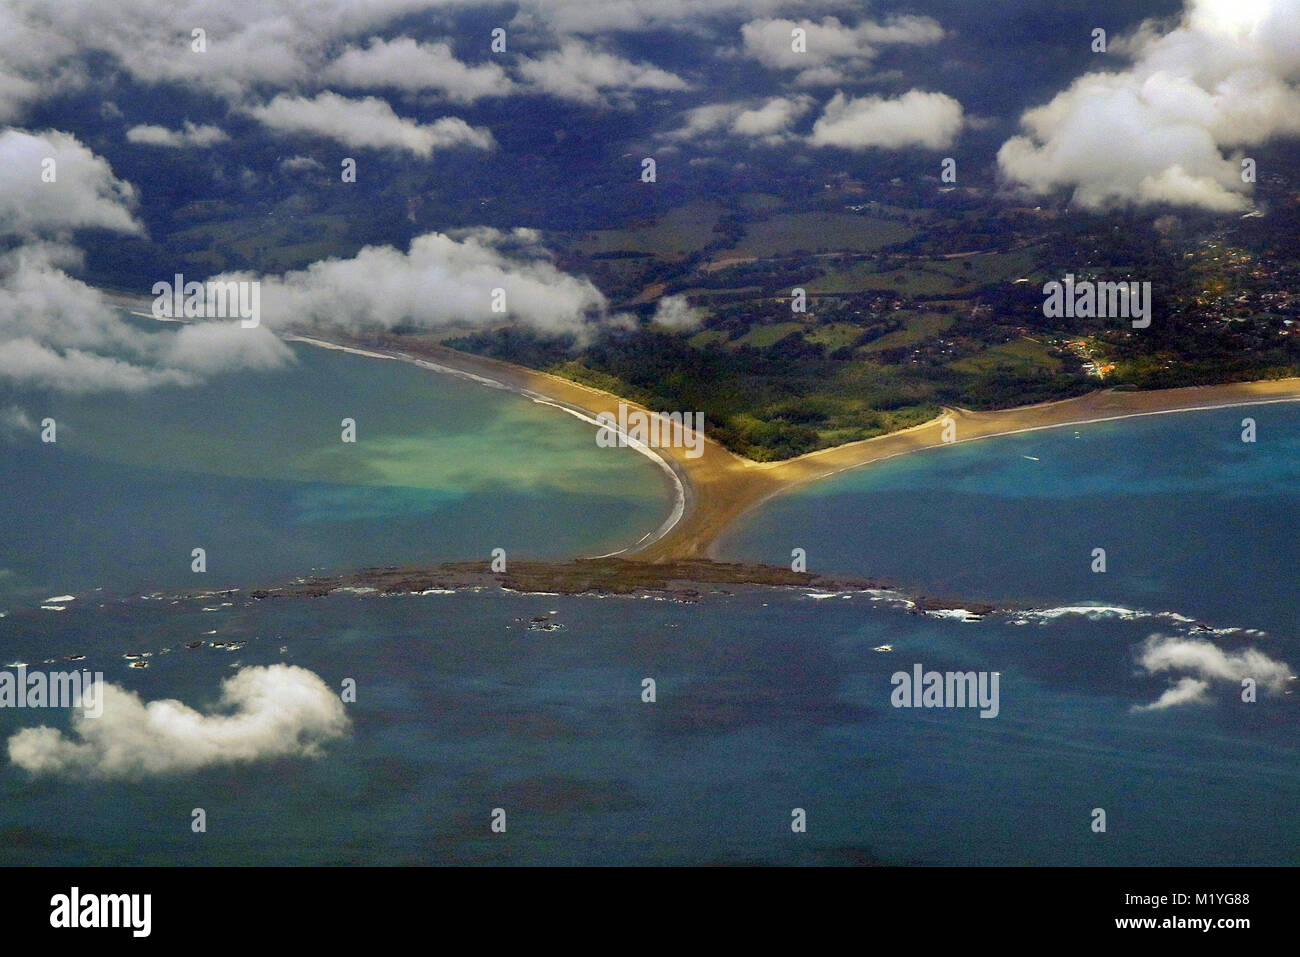 Aerial view of the Marino Ballena National Park in Uvita, on the Pacific Coast of Costa Rica Stock Photo